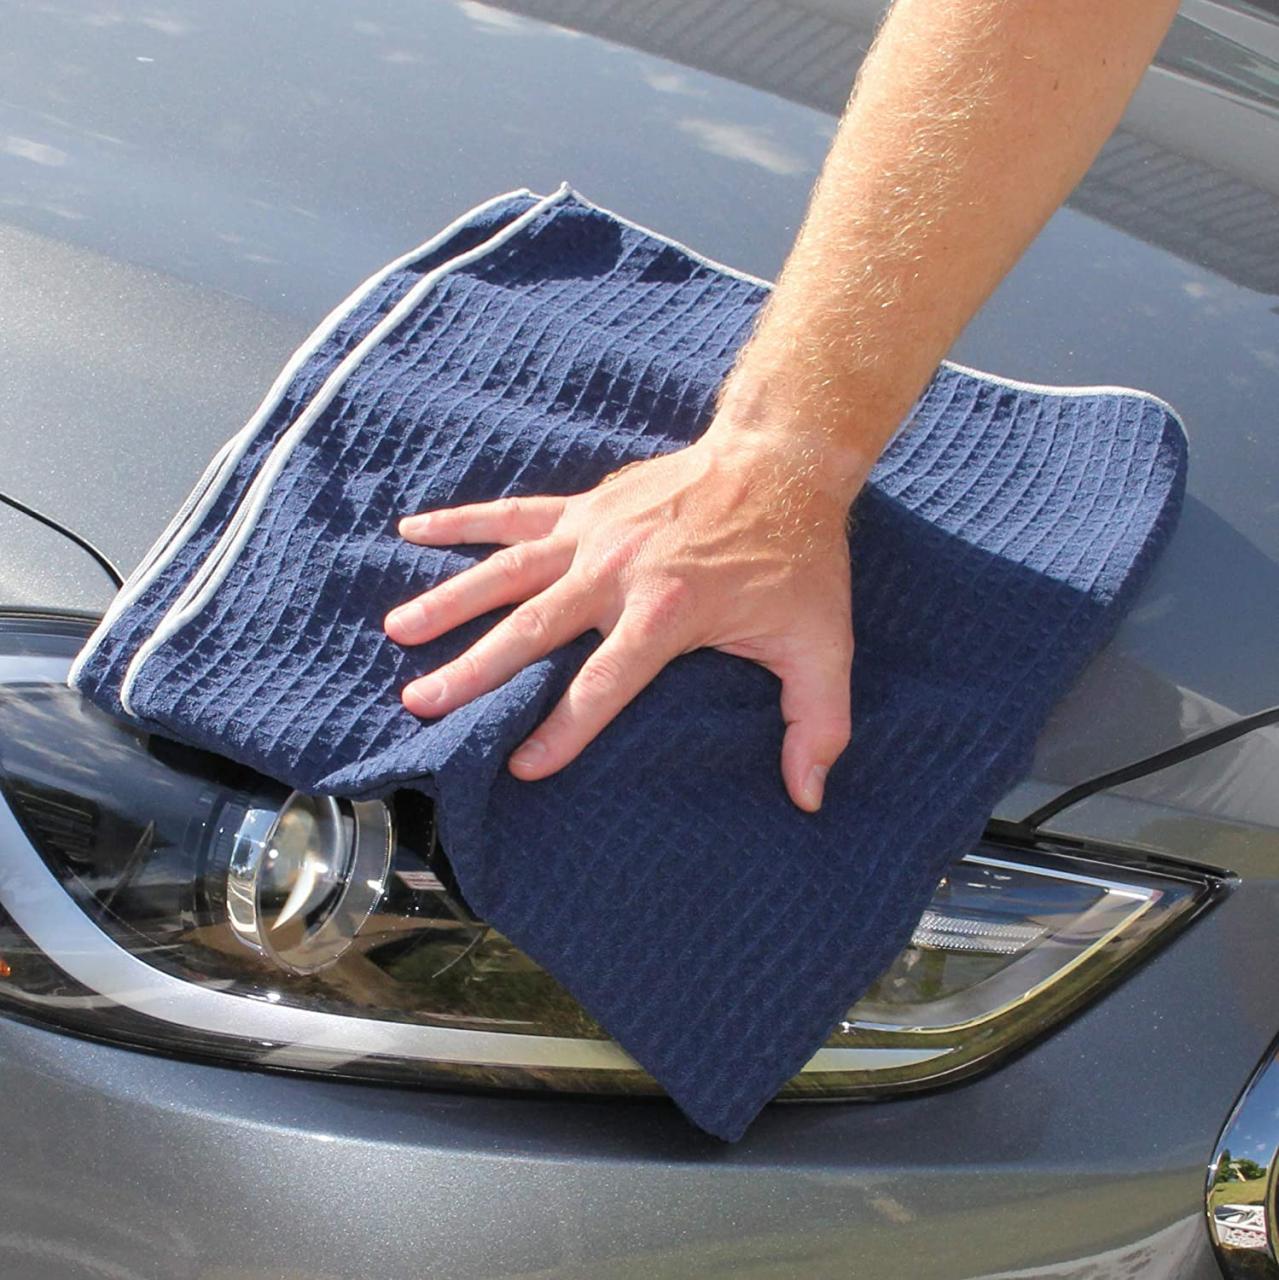 VIKING 922401 Soft Microfiber Waffle Weave Drying Towel 28 Inches x 36  Inches Navy Cloths hauglegesenter Car Care